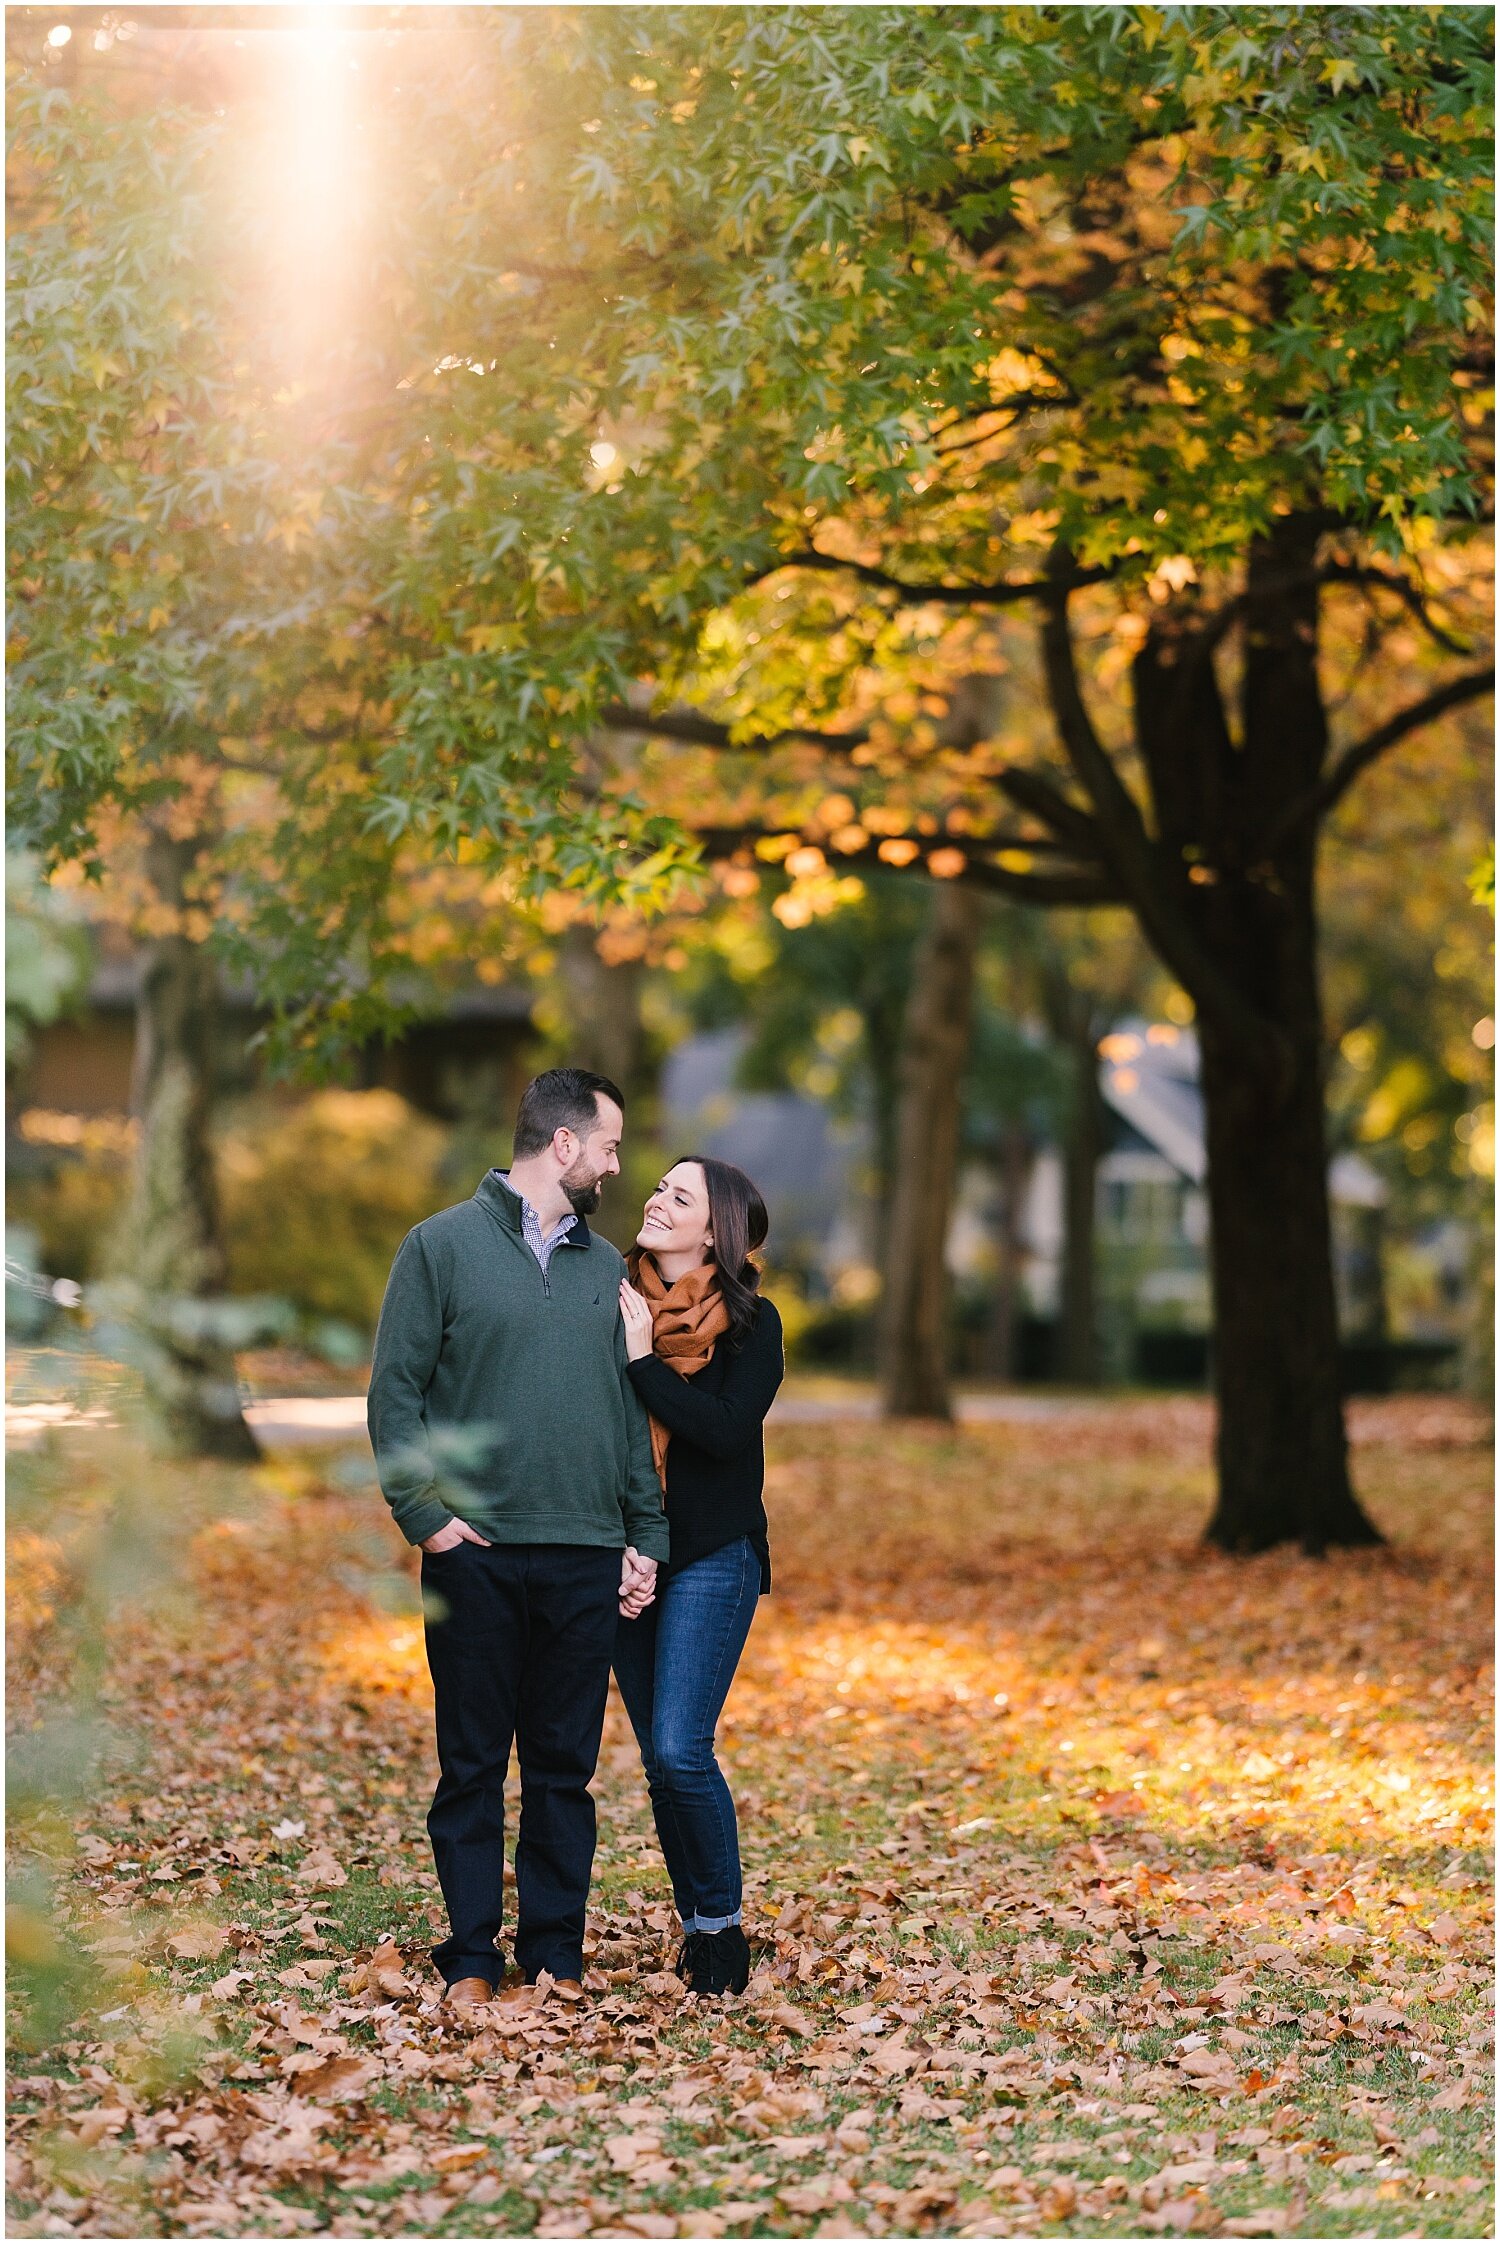 living+roots+wine+engagement+session+rochester+ny+wedding+photographer (19).jpg